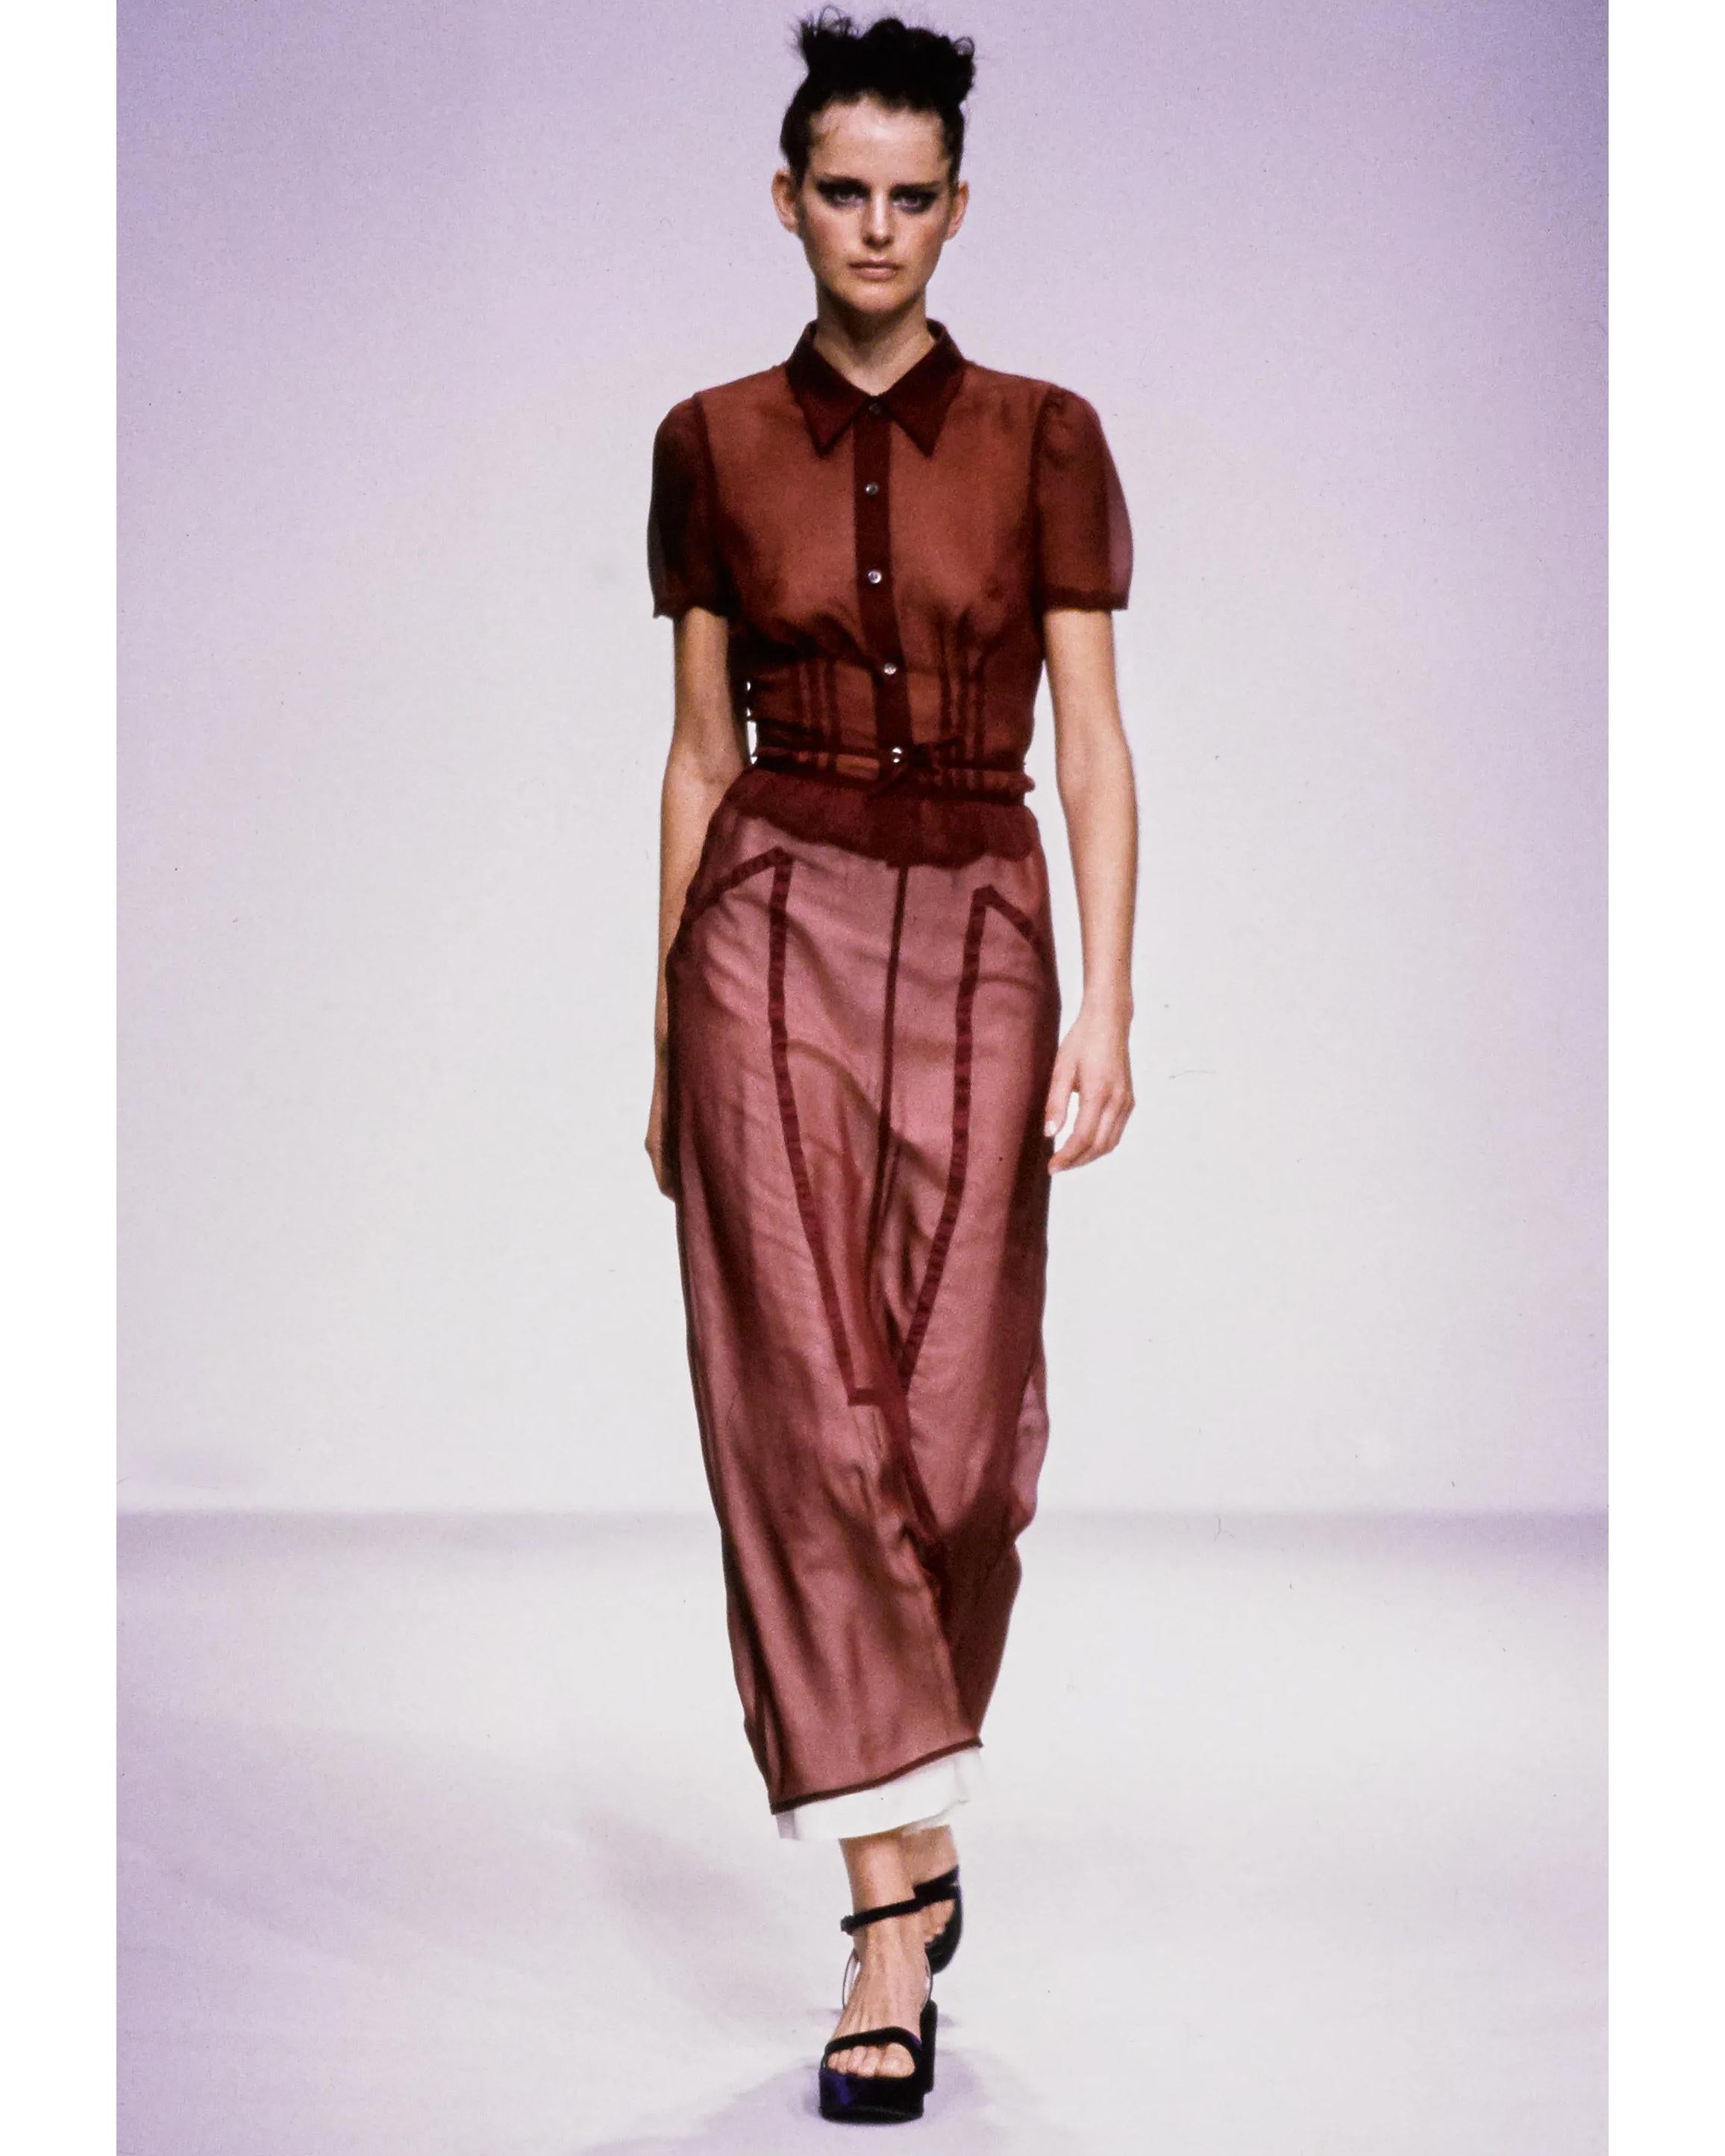 S/S 1997 Prada by Miuccia Prada merlot silk chiffon skirt set. Deep red collared semi-sheer shirt with front button closures and tie-waist design (can be styled tied in front or back). Features three line contrast detailing under breast and slightly